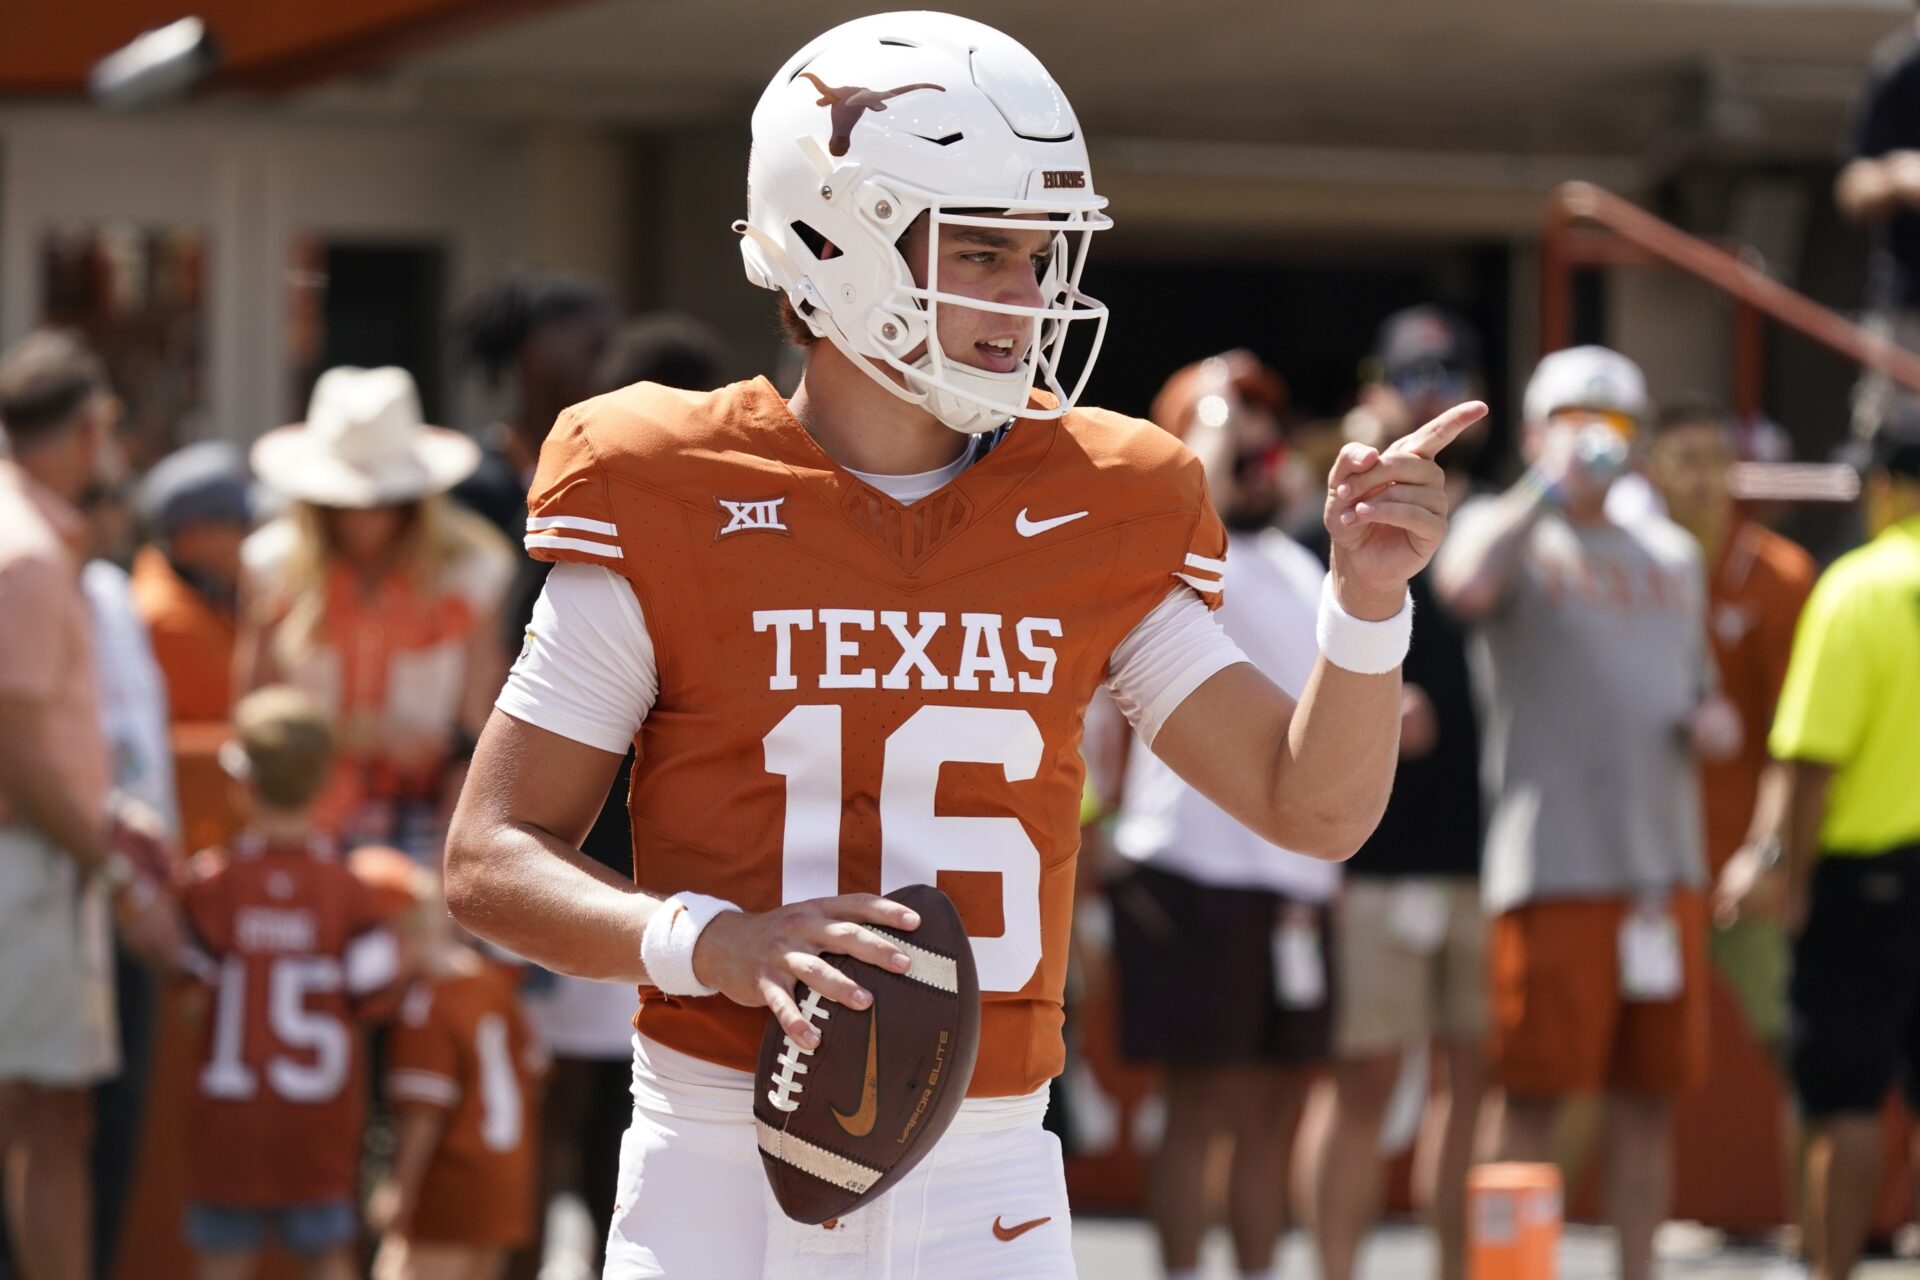 Why Isn't Arch Manning Starting for Texas? Status of Longhorns QB